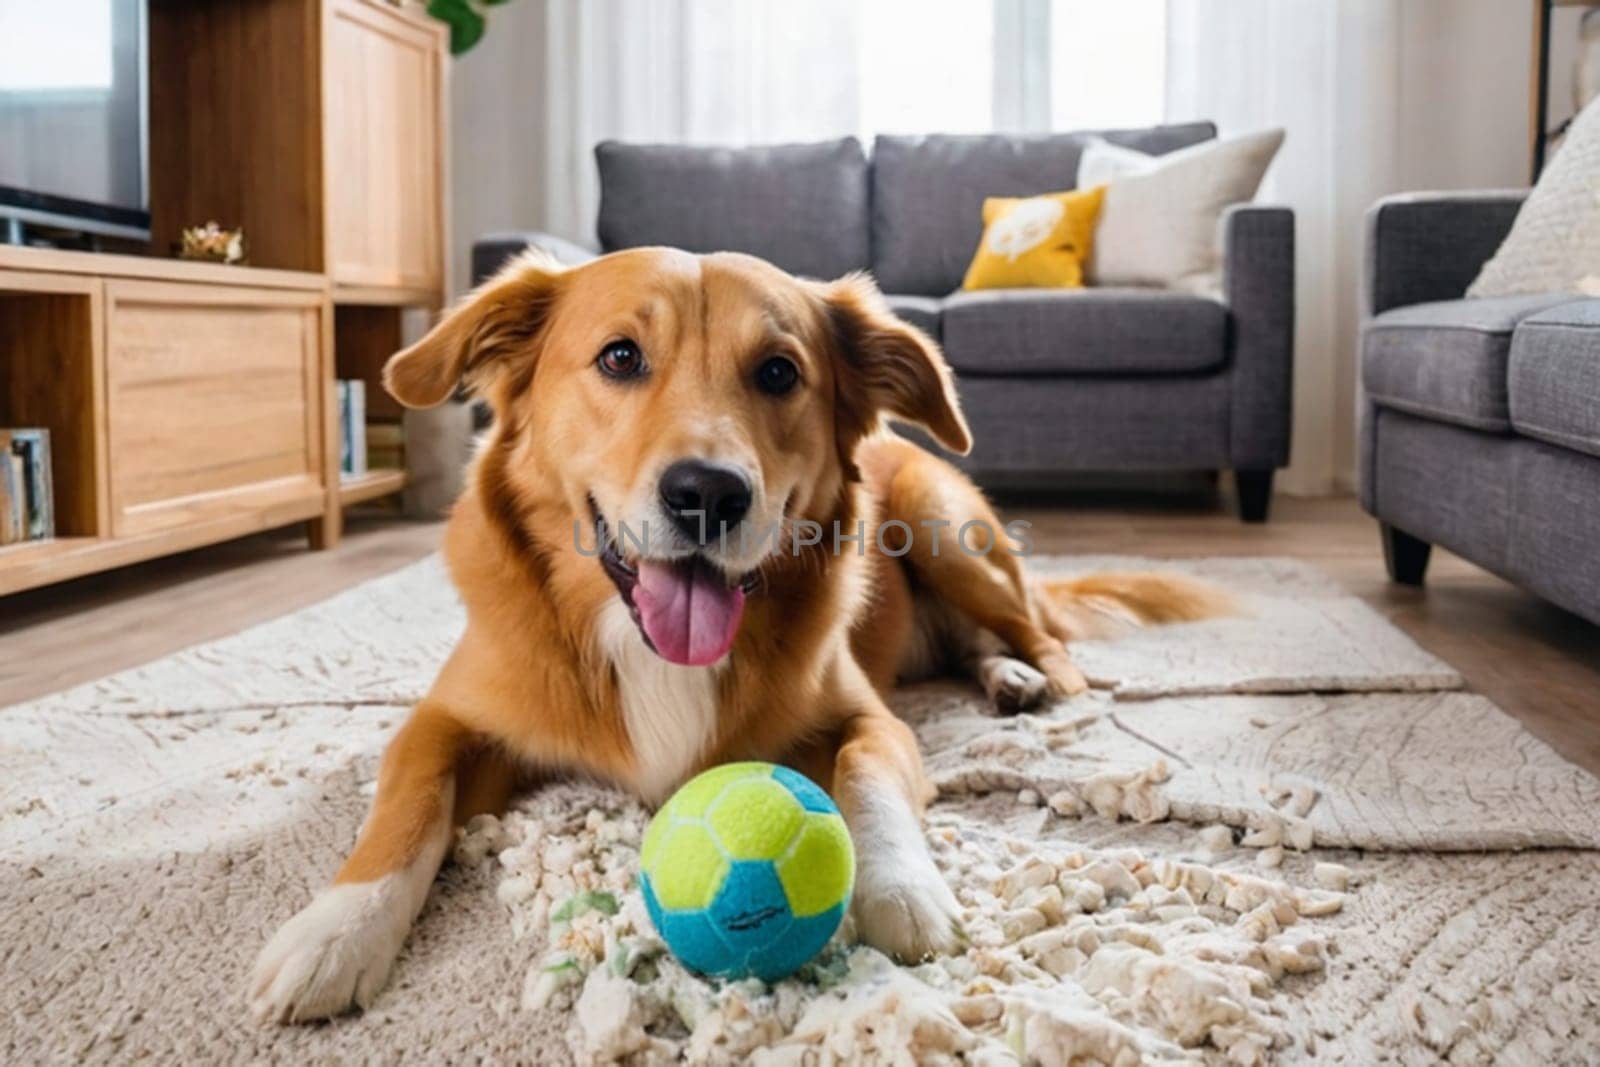 Cheerful dog at home in the living room playing with his toys by Ekaterina34